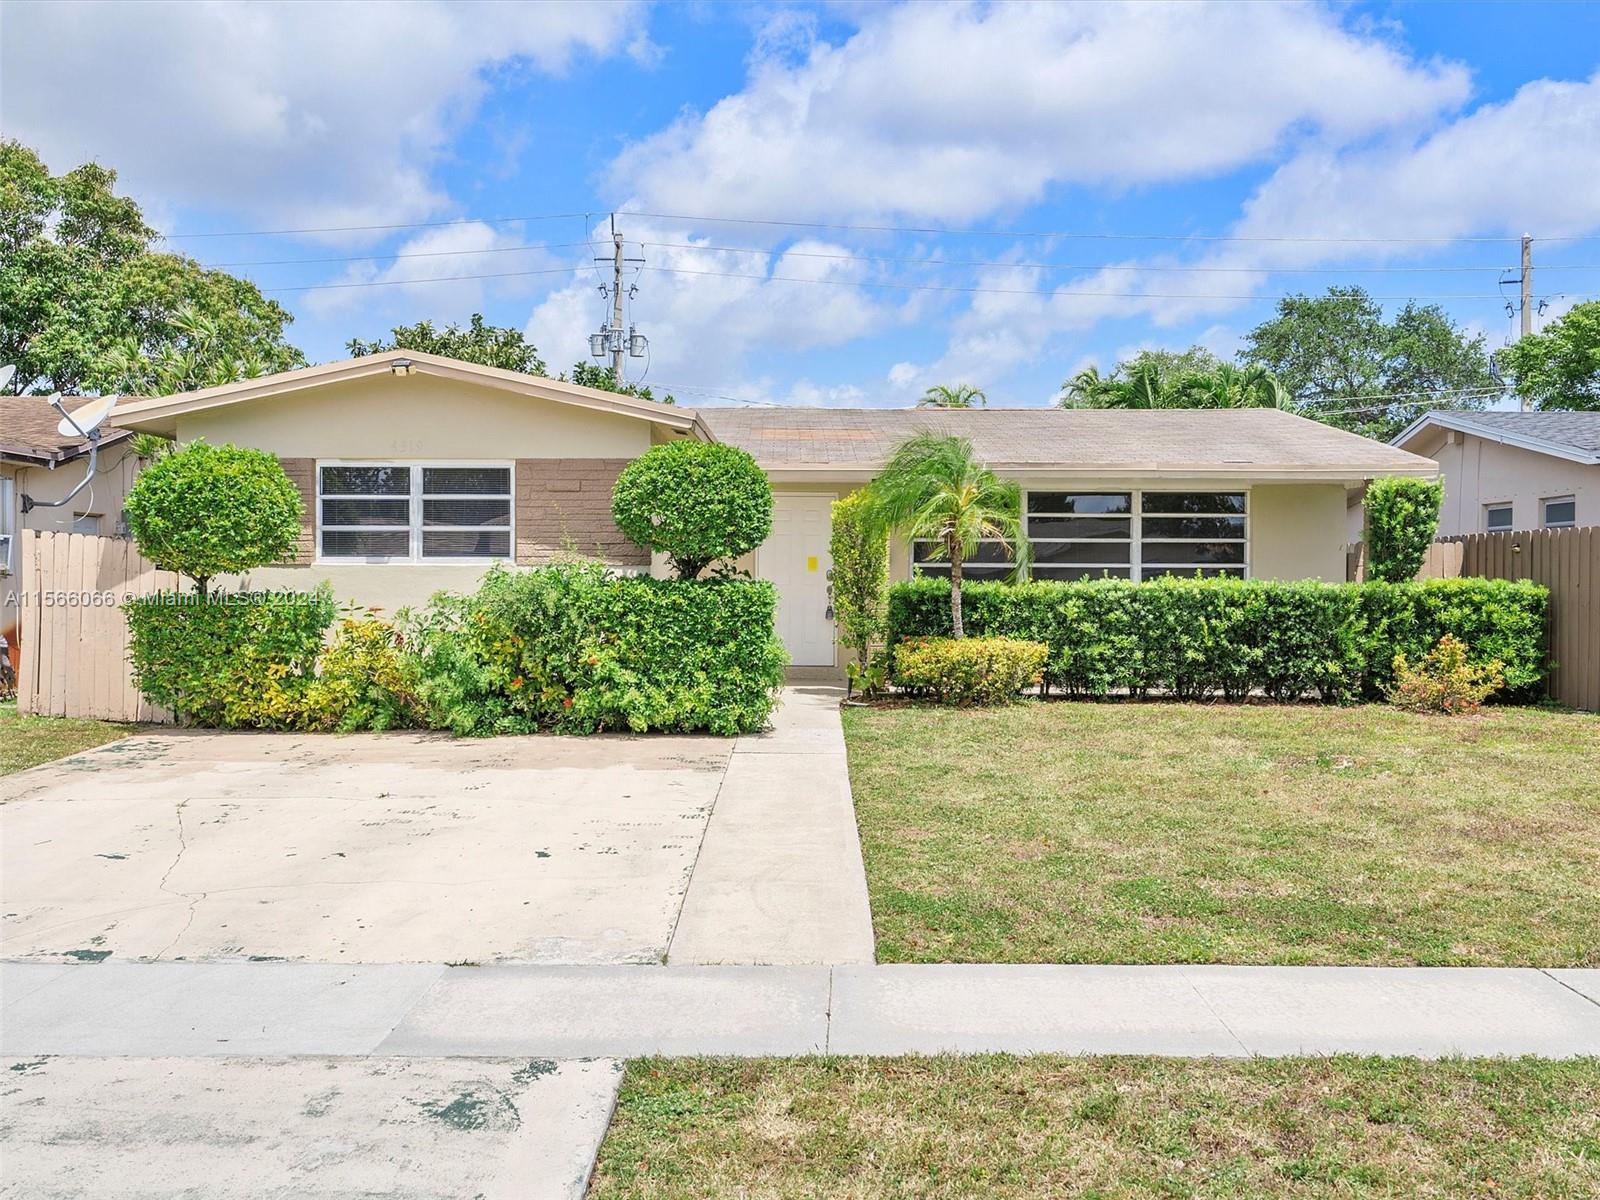 Photo of 4319 Harrison St in Hollywood, FL